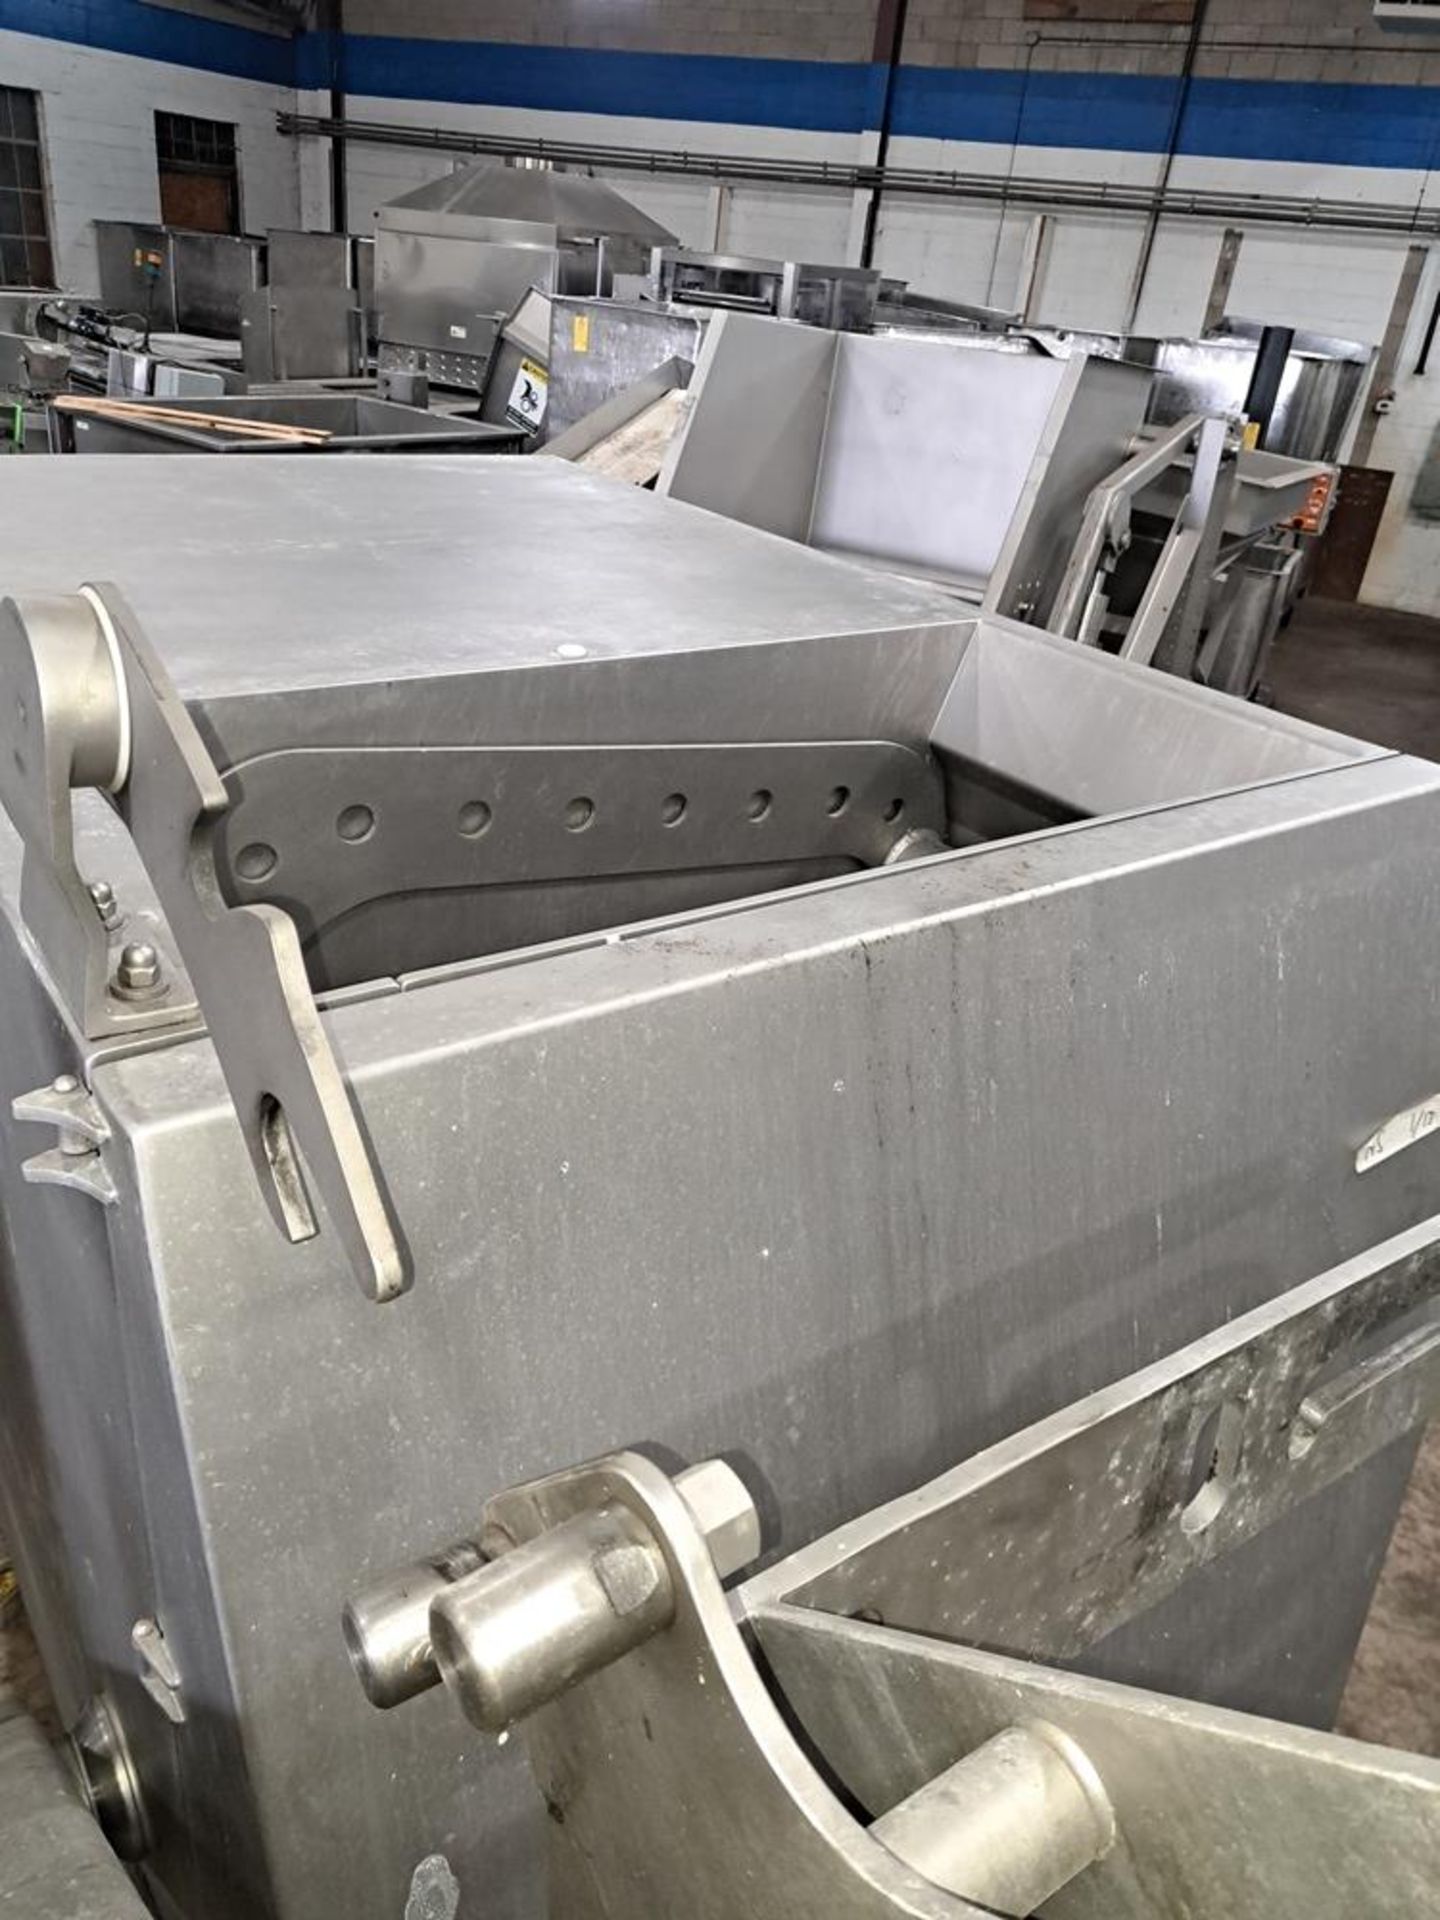 Ruhle Mdl. 5R3 Meat Dicer with buggie lift, 380 VAC (transformer available) (Located in Plano, IL) - Image 4 of 10